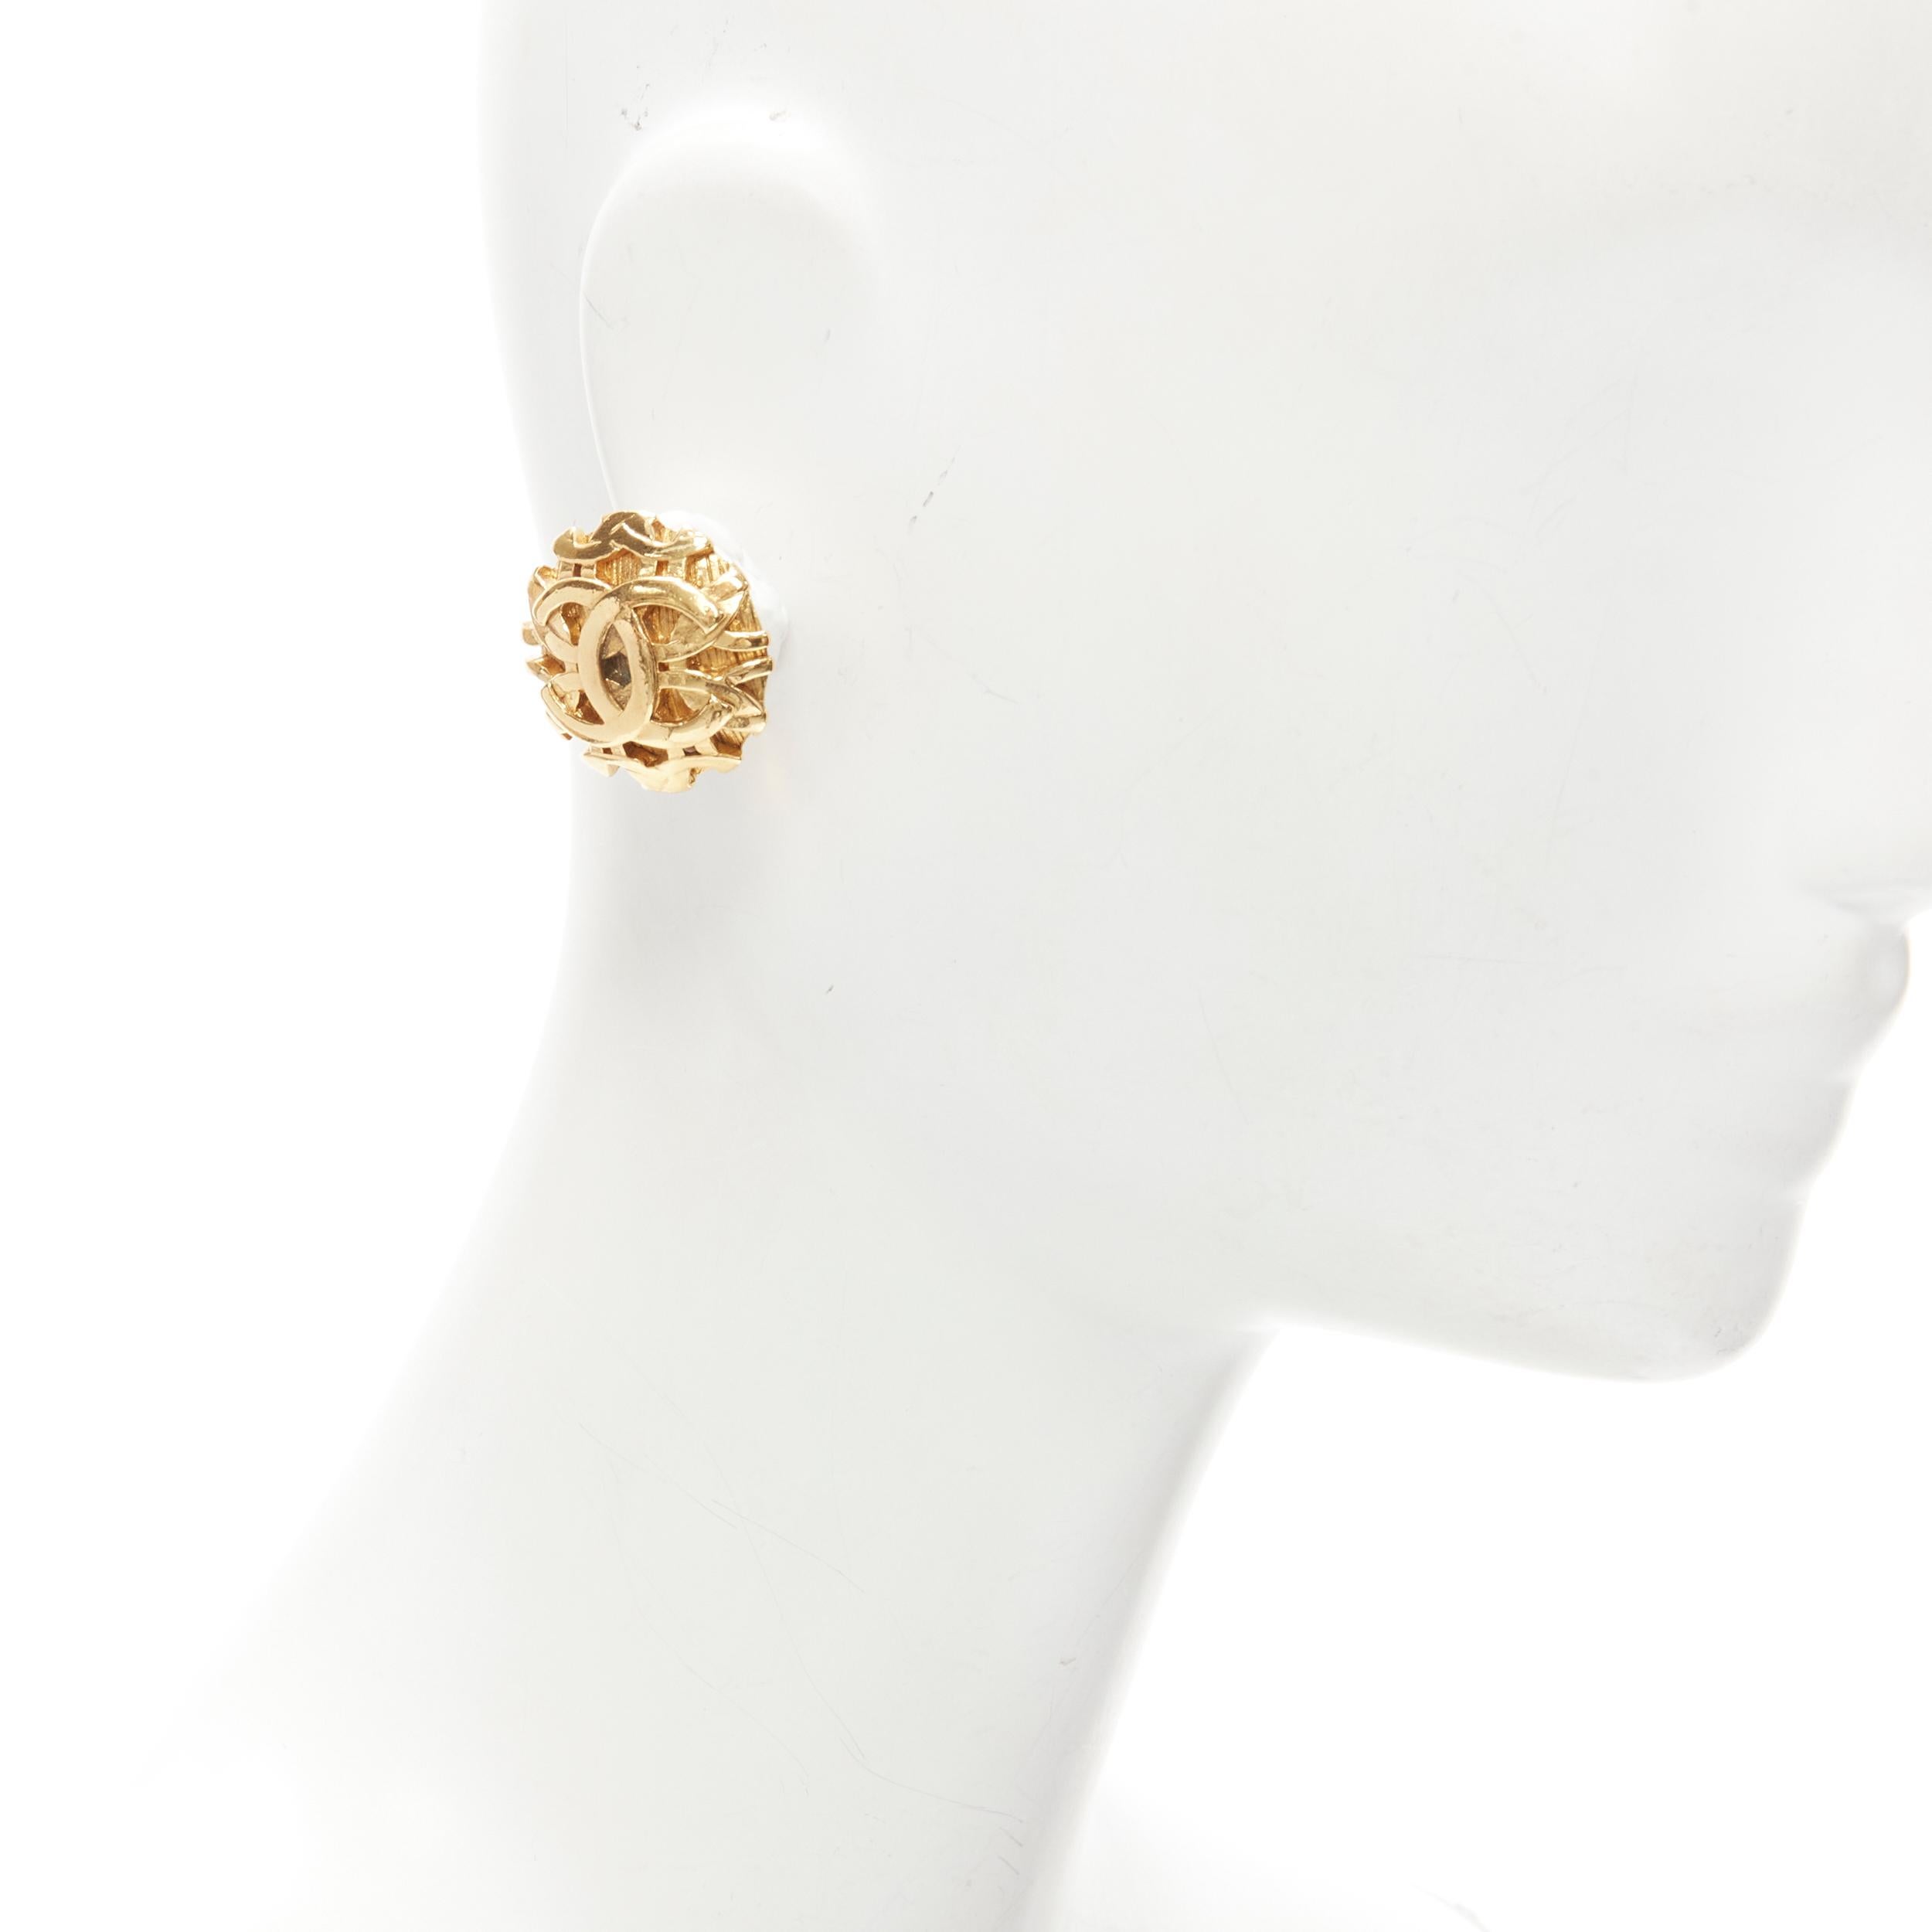 CHANEL Vintage 1990's 93A gold-tone CC lattice pattern medallion clip earrings
Brand: Chanel
Designer: Karl Lagerfeld
Collection: 93A 
Material: Metal
Color: Gold
Pattern: Solid
Closure: Clip On
Made in: France

CONDITION:
Condition: Excellent, this